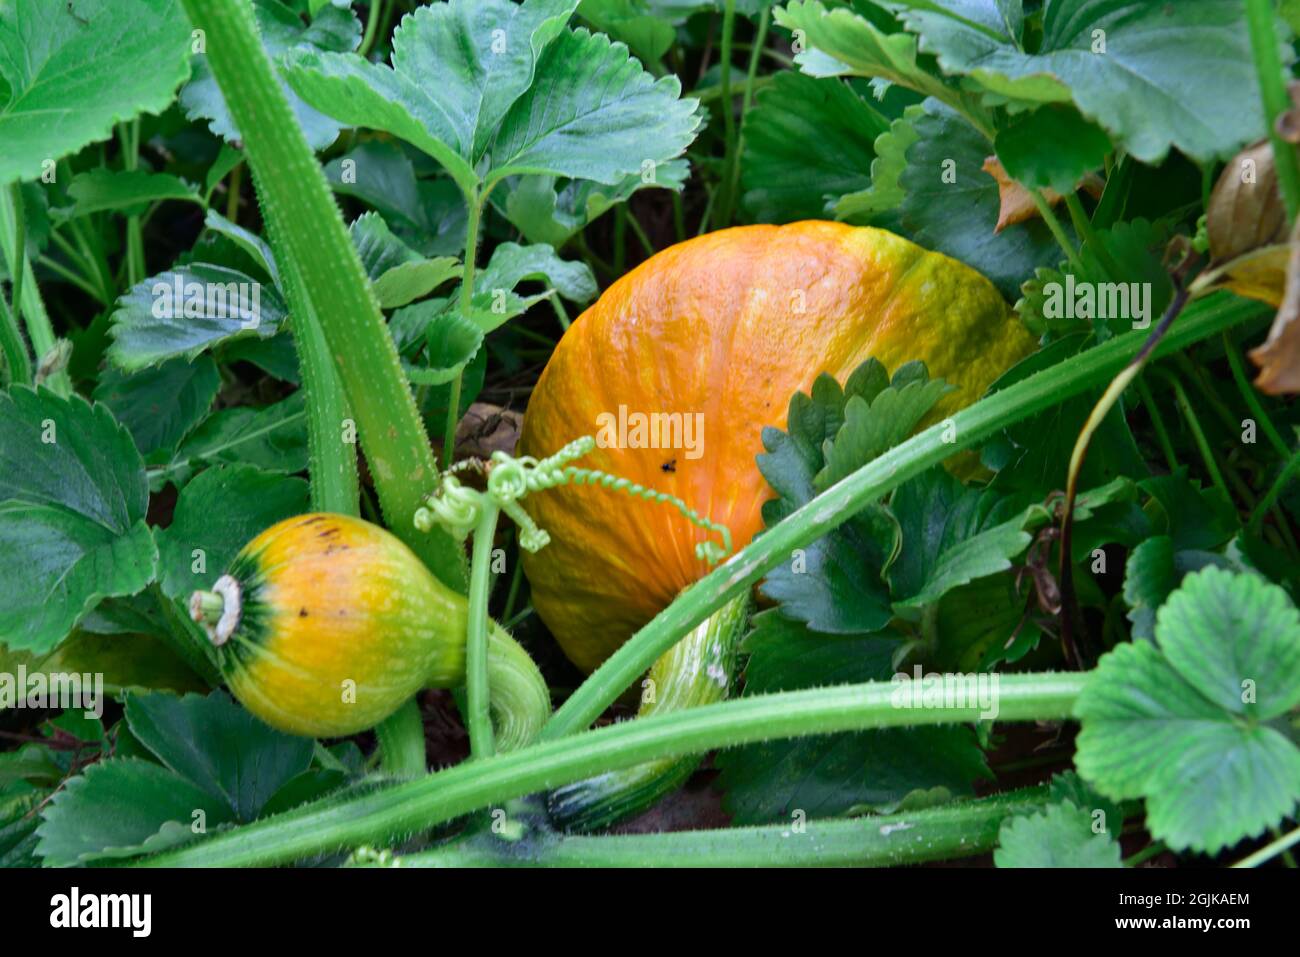 Winter Hokkaido  Squash growing on vine in home garden with flowers and leaves Stock Photo